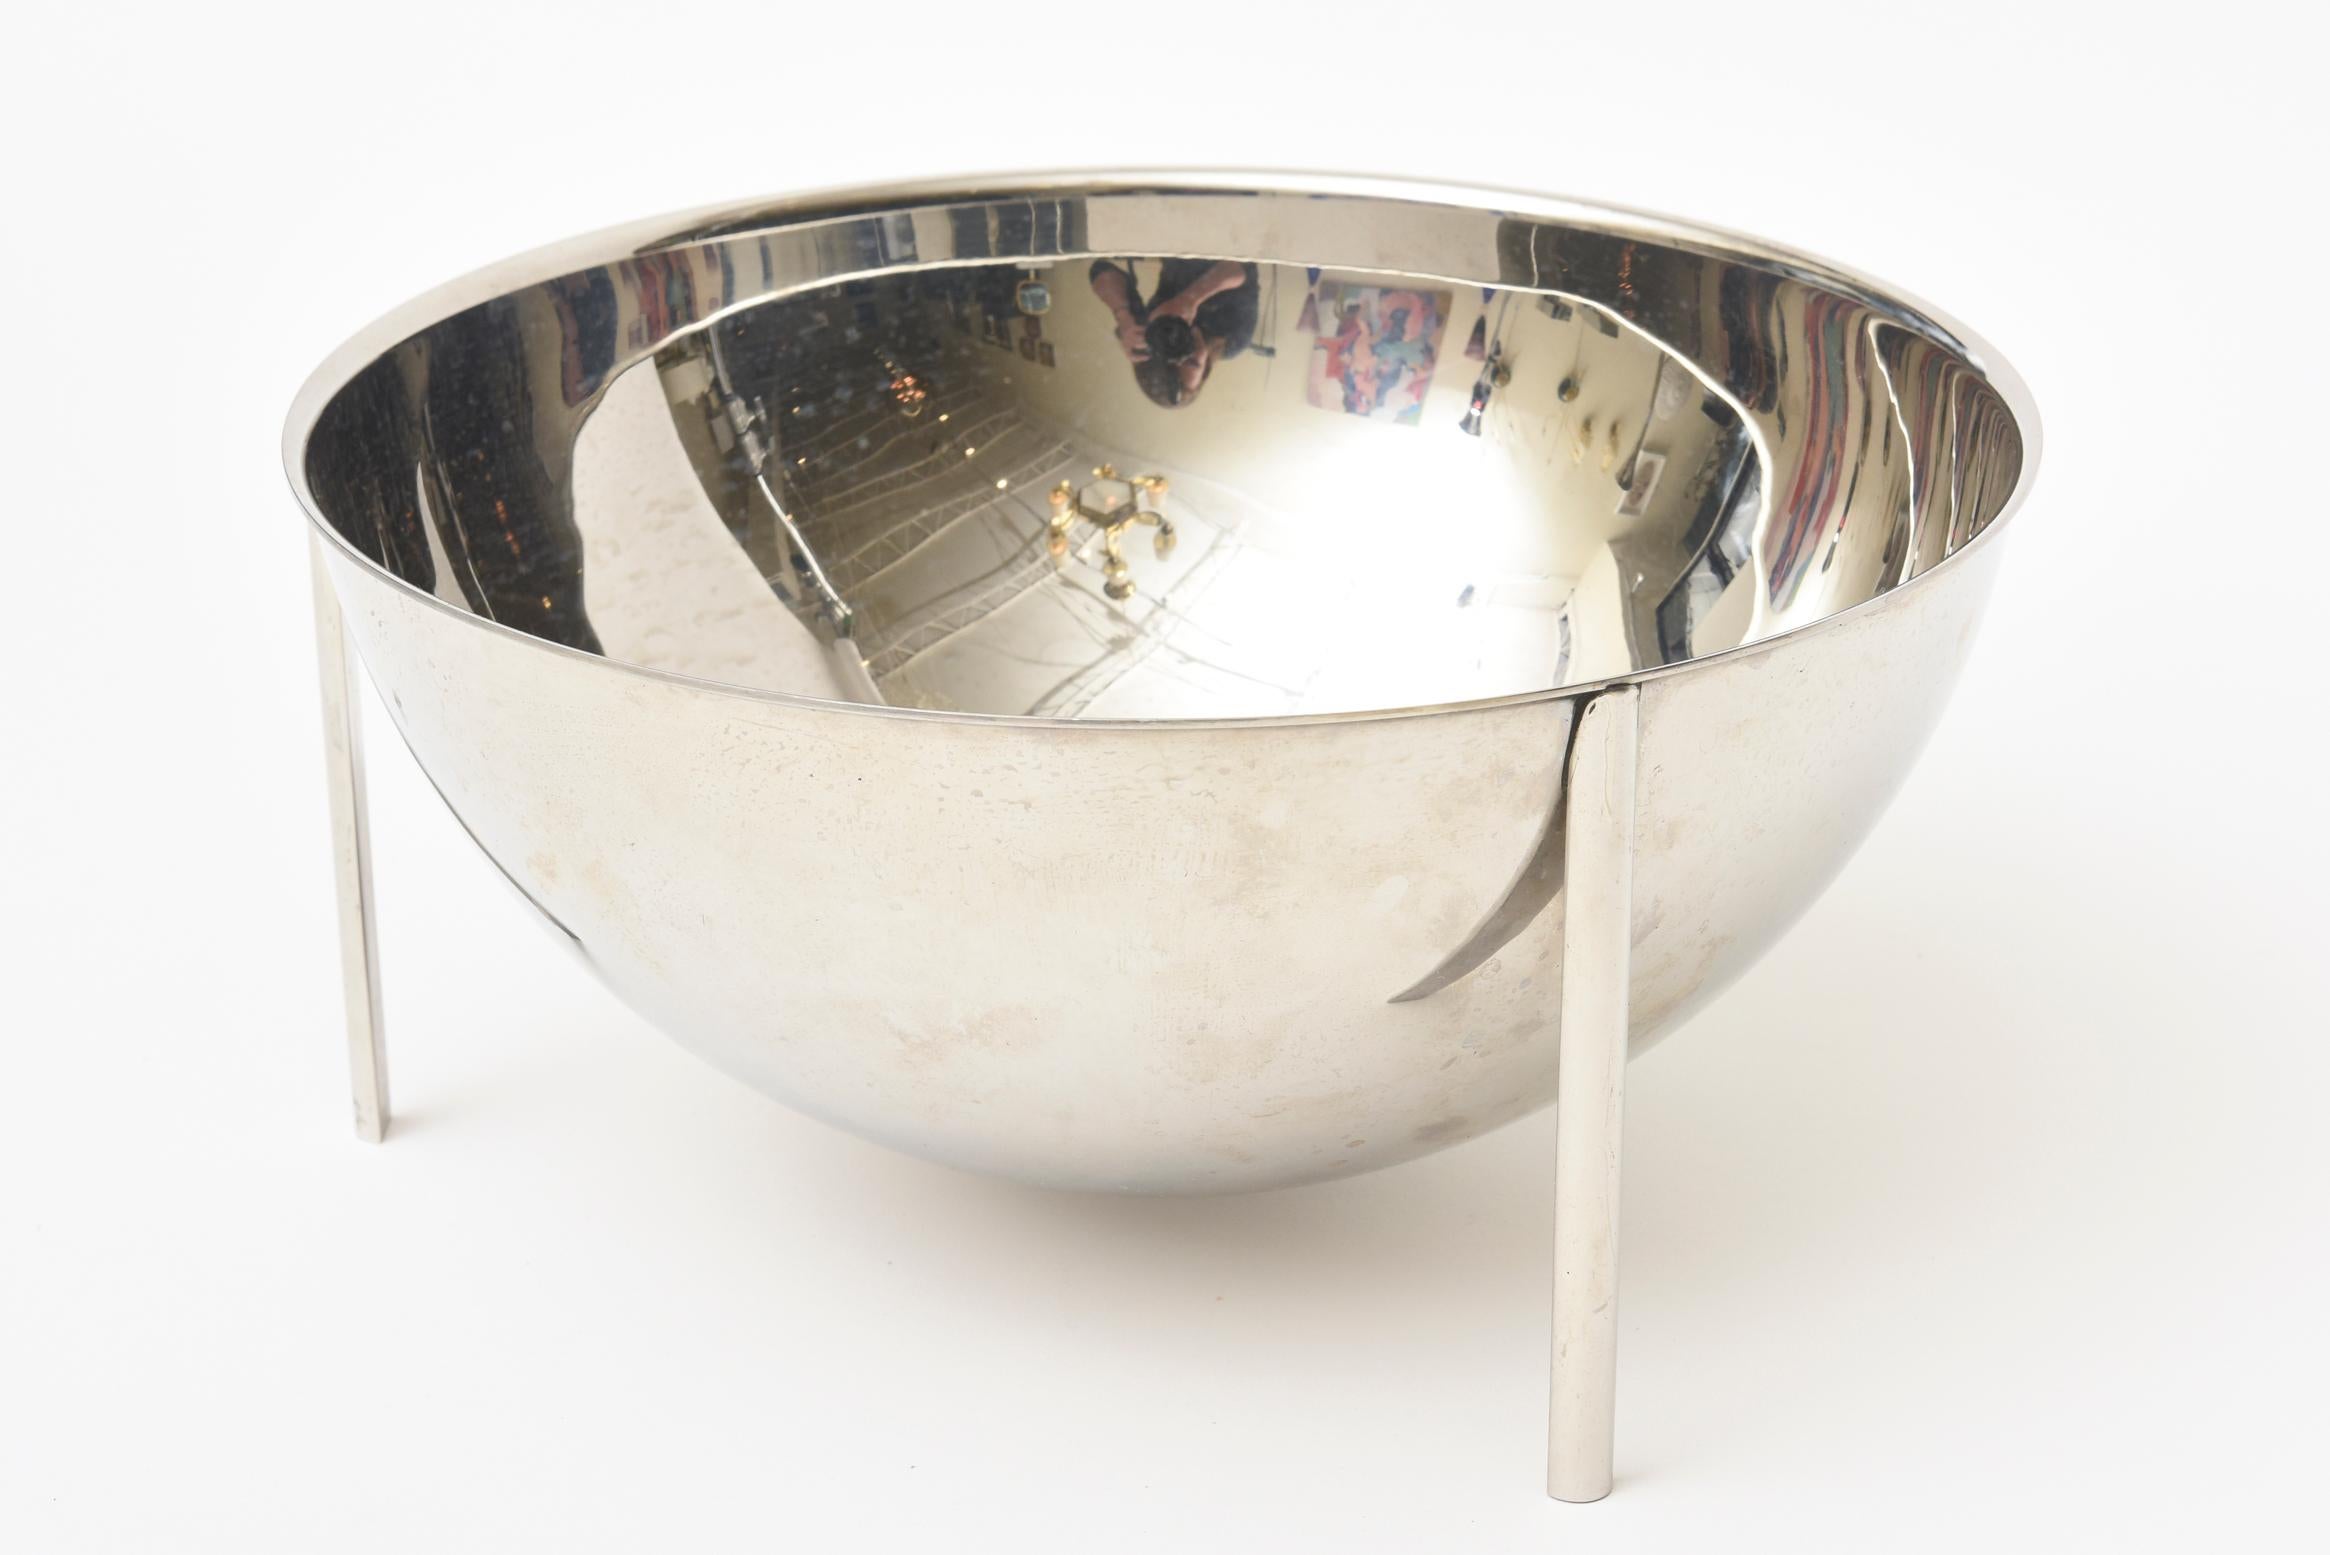 This architectural and modern signed Enzo Mari circular stainless steel bowl manufactured by Zani and Zani sits on 3 post legs. It is hallmarked with the numbers 18/10 and signed Enzo Mari per Zani and Zani. This is in the permanent collection of